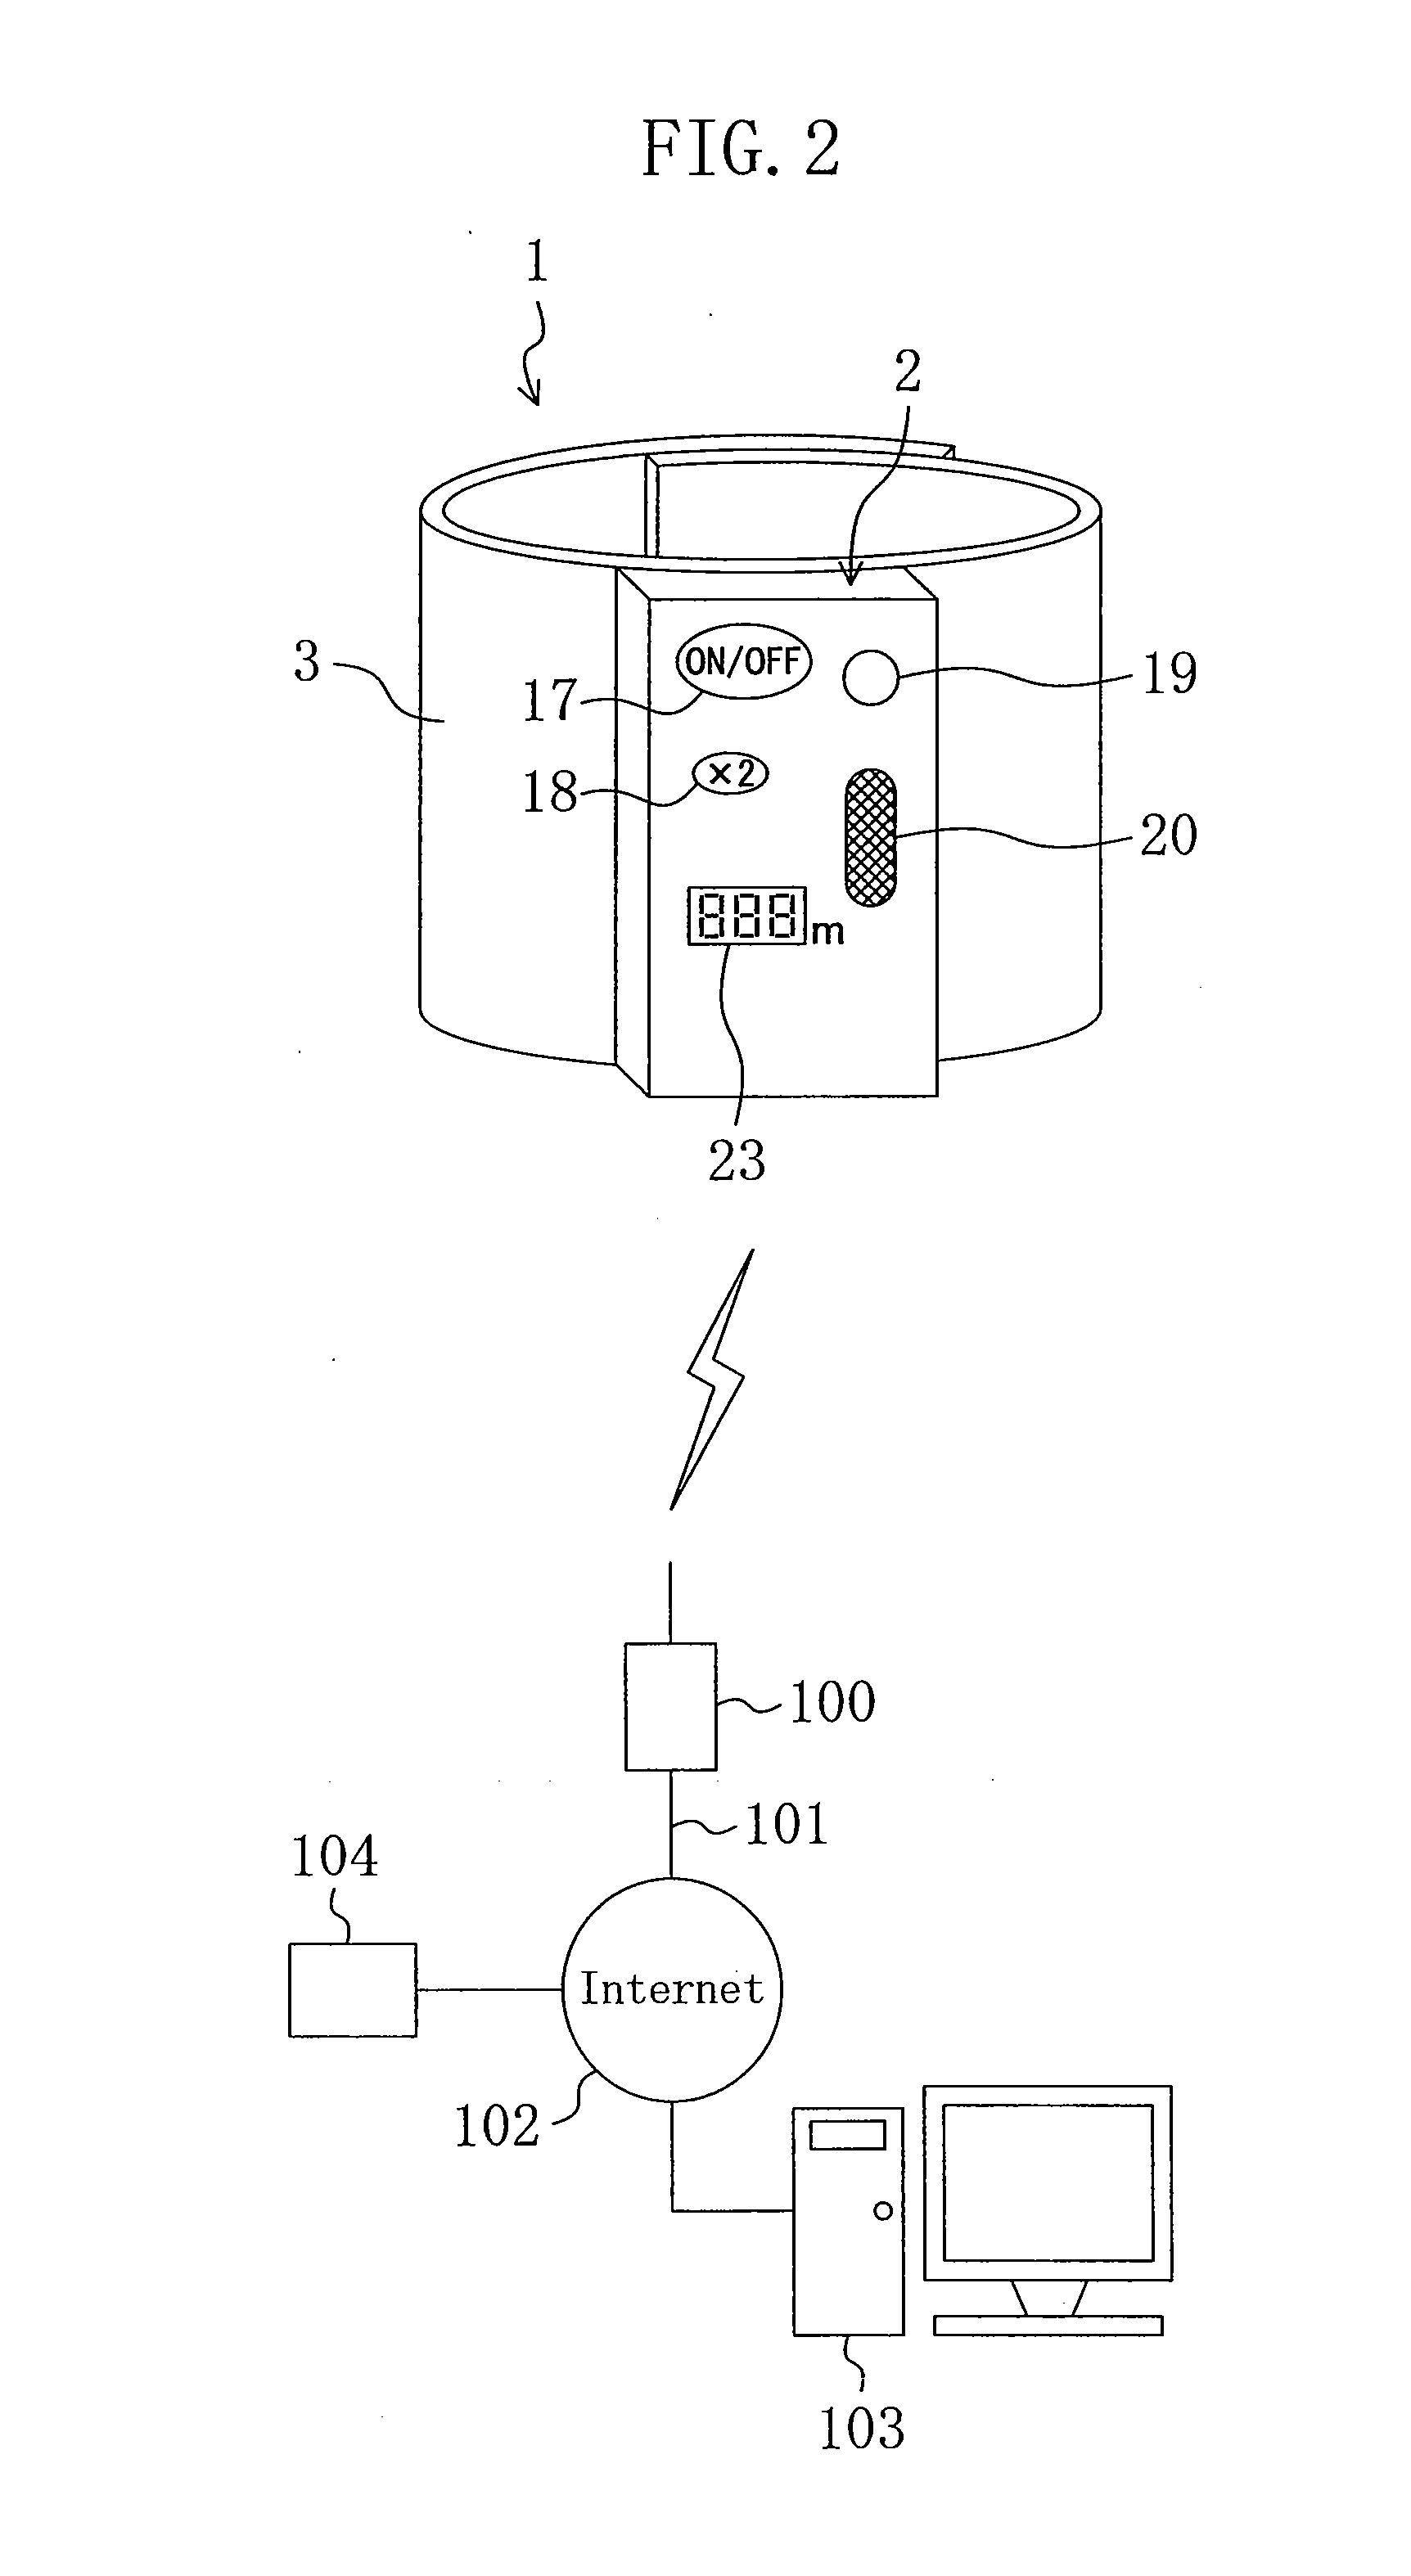 Apparatus for exercise therapy and diagnosis apparatus for lower extremity limb arterial occlusive disease